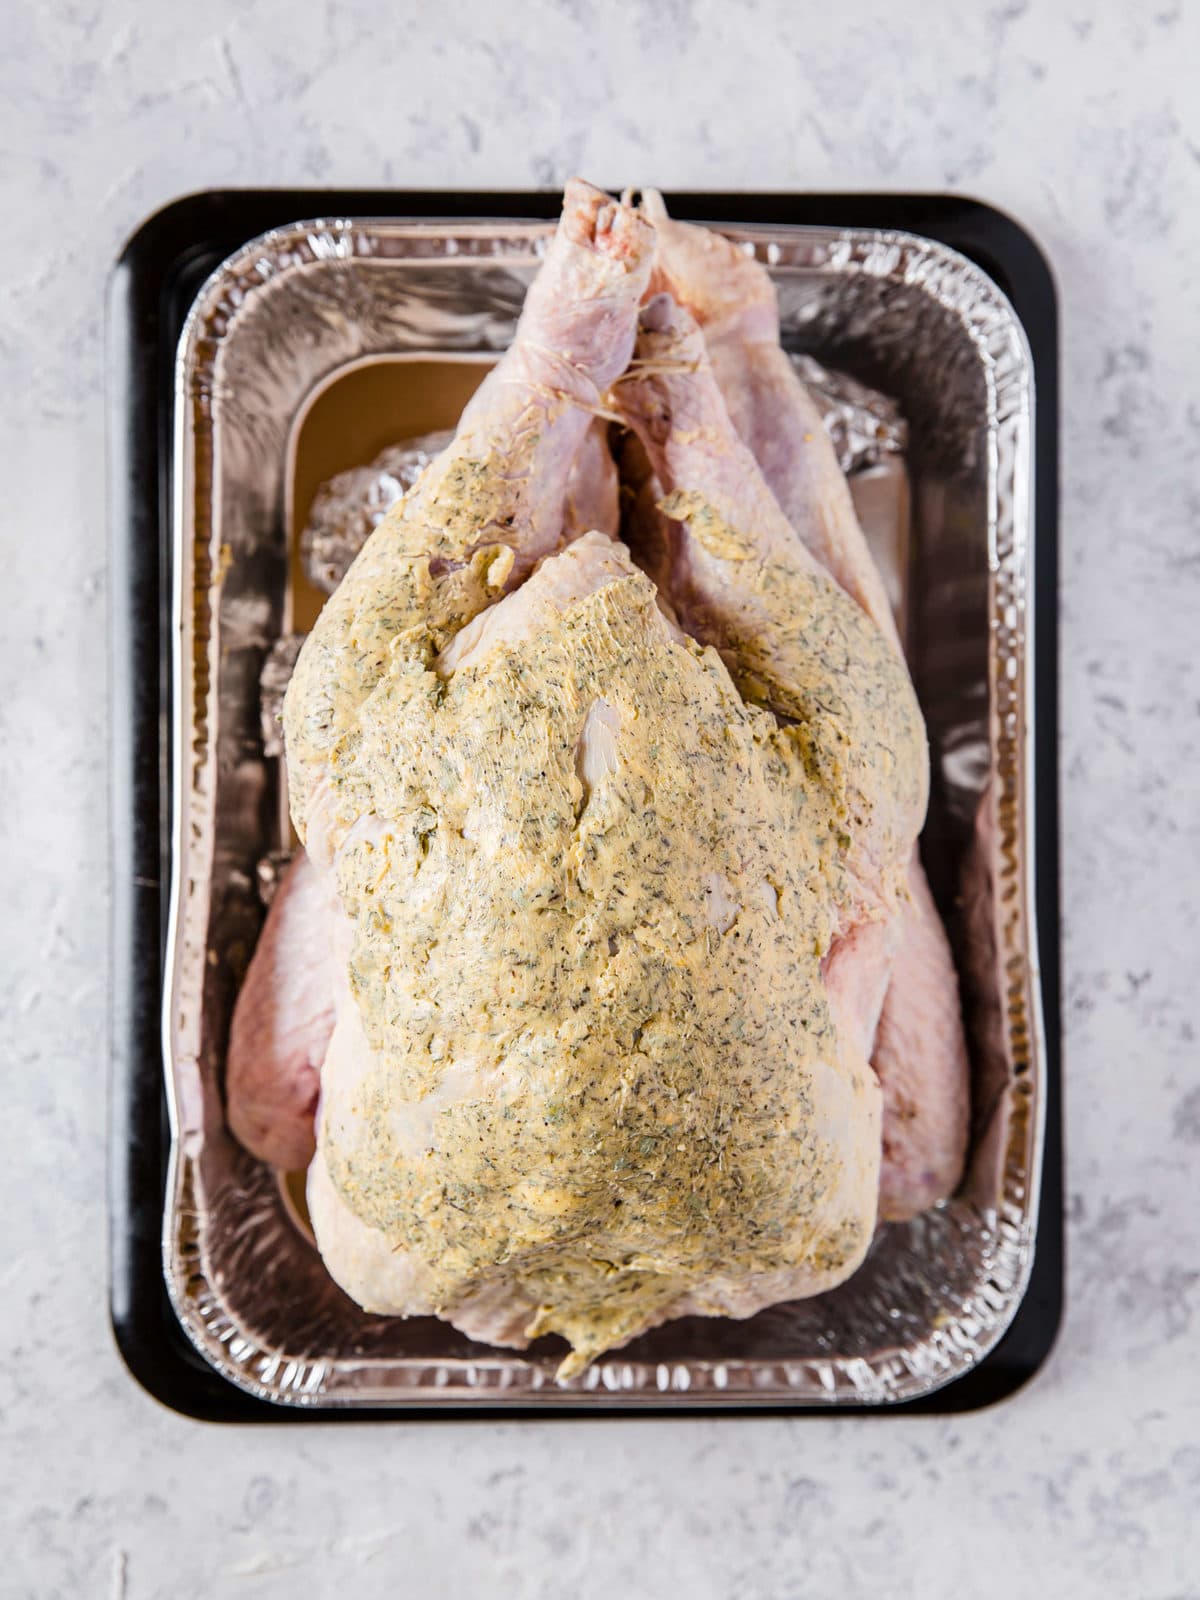 An aluminum roasting pan with a raw turkey in it that is covered with compound butter.